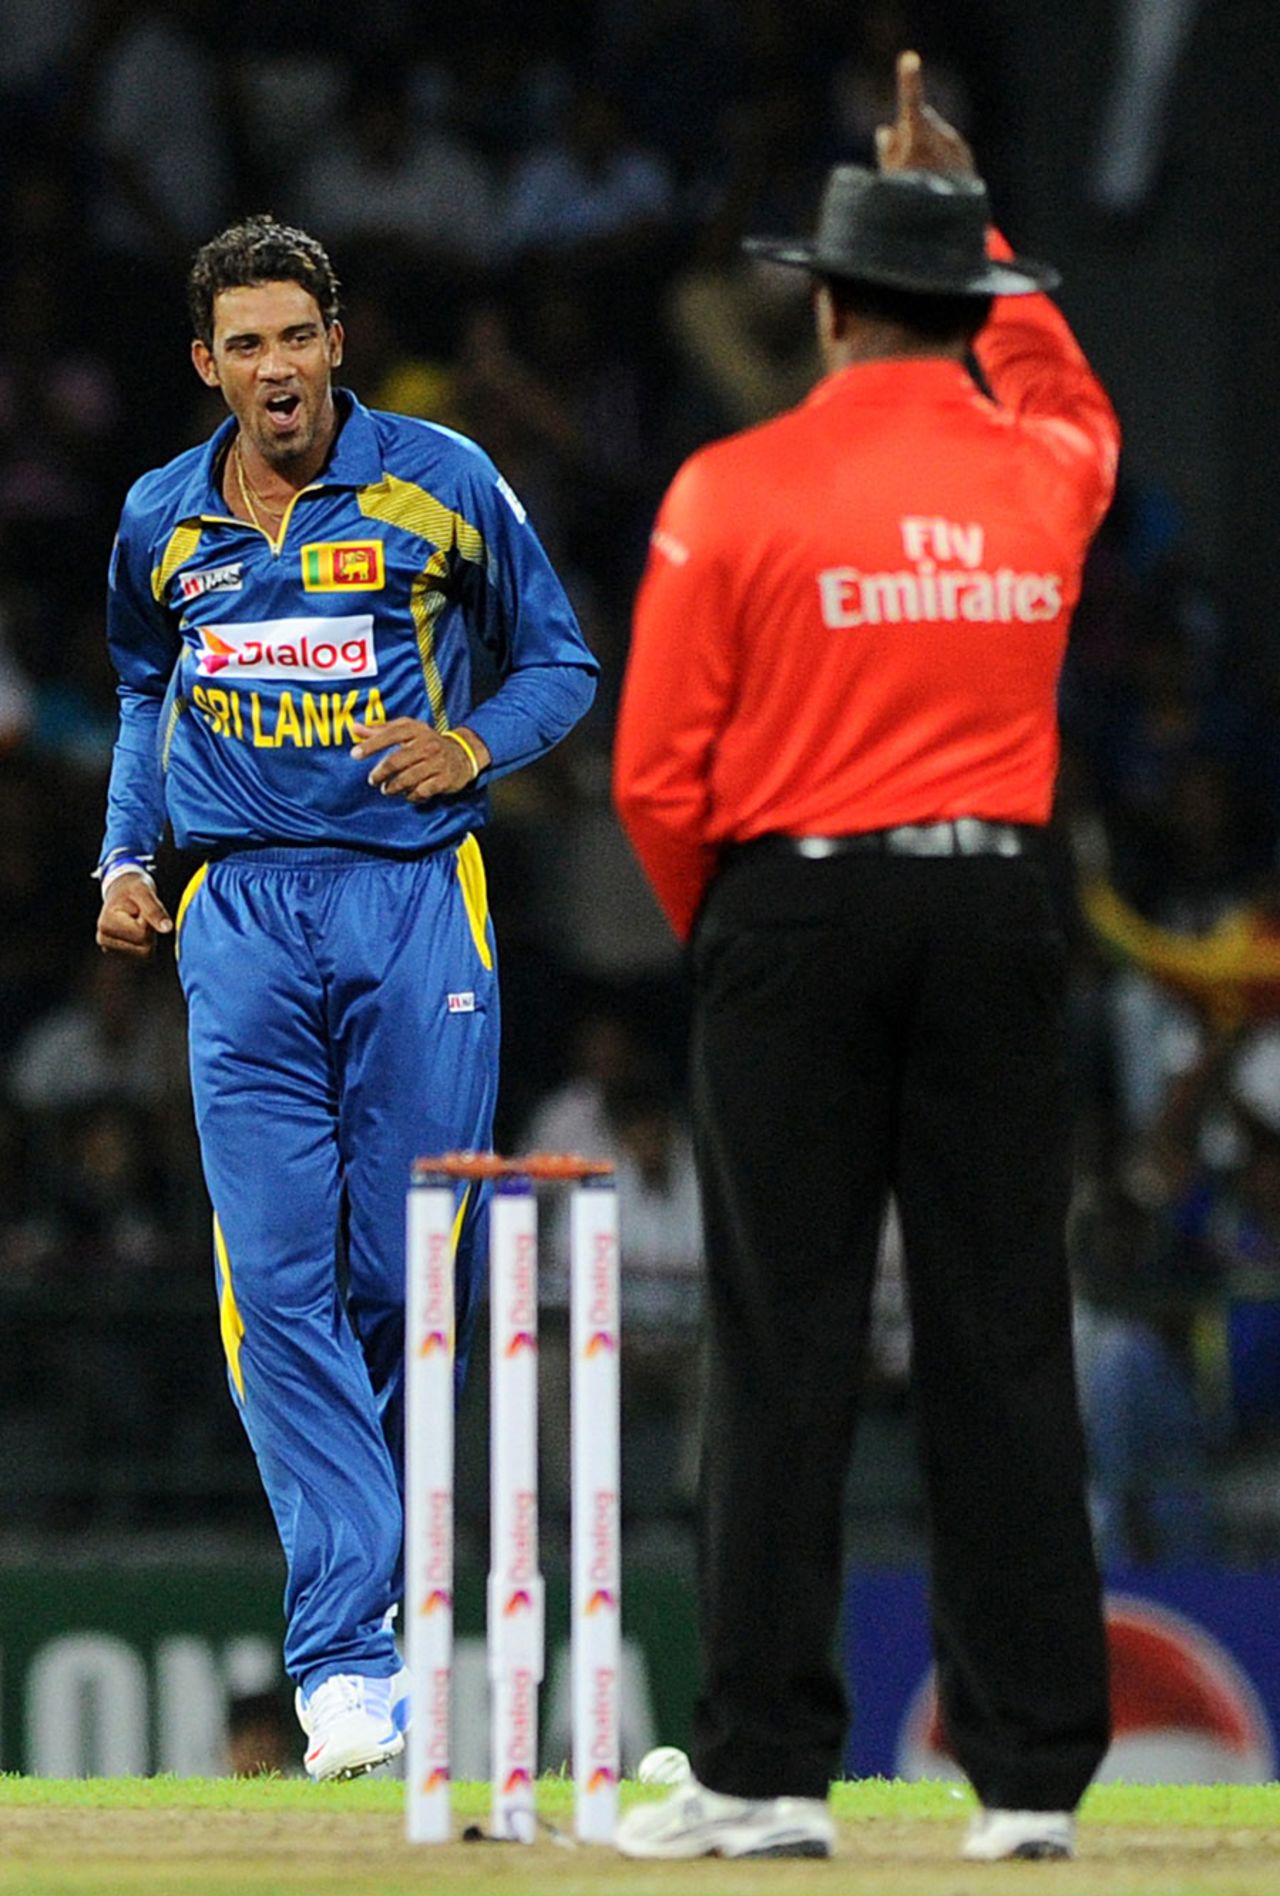 Sachithra Senanayake exults after getting a wicket, Sri Lanka v South Africa, 1st T20, Colombo, August 2, 2013